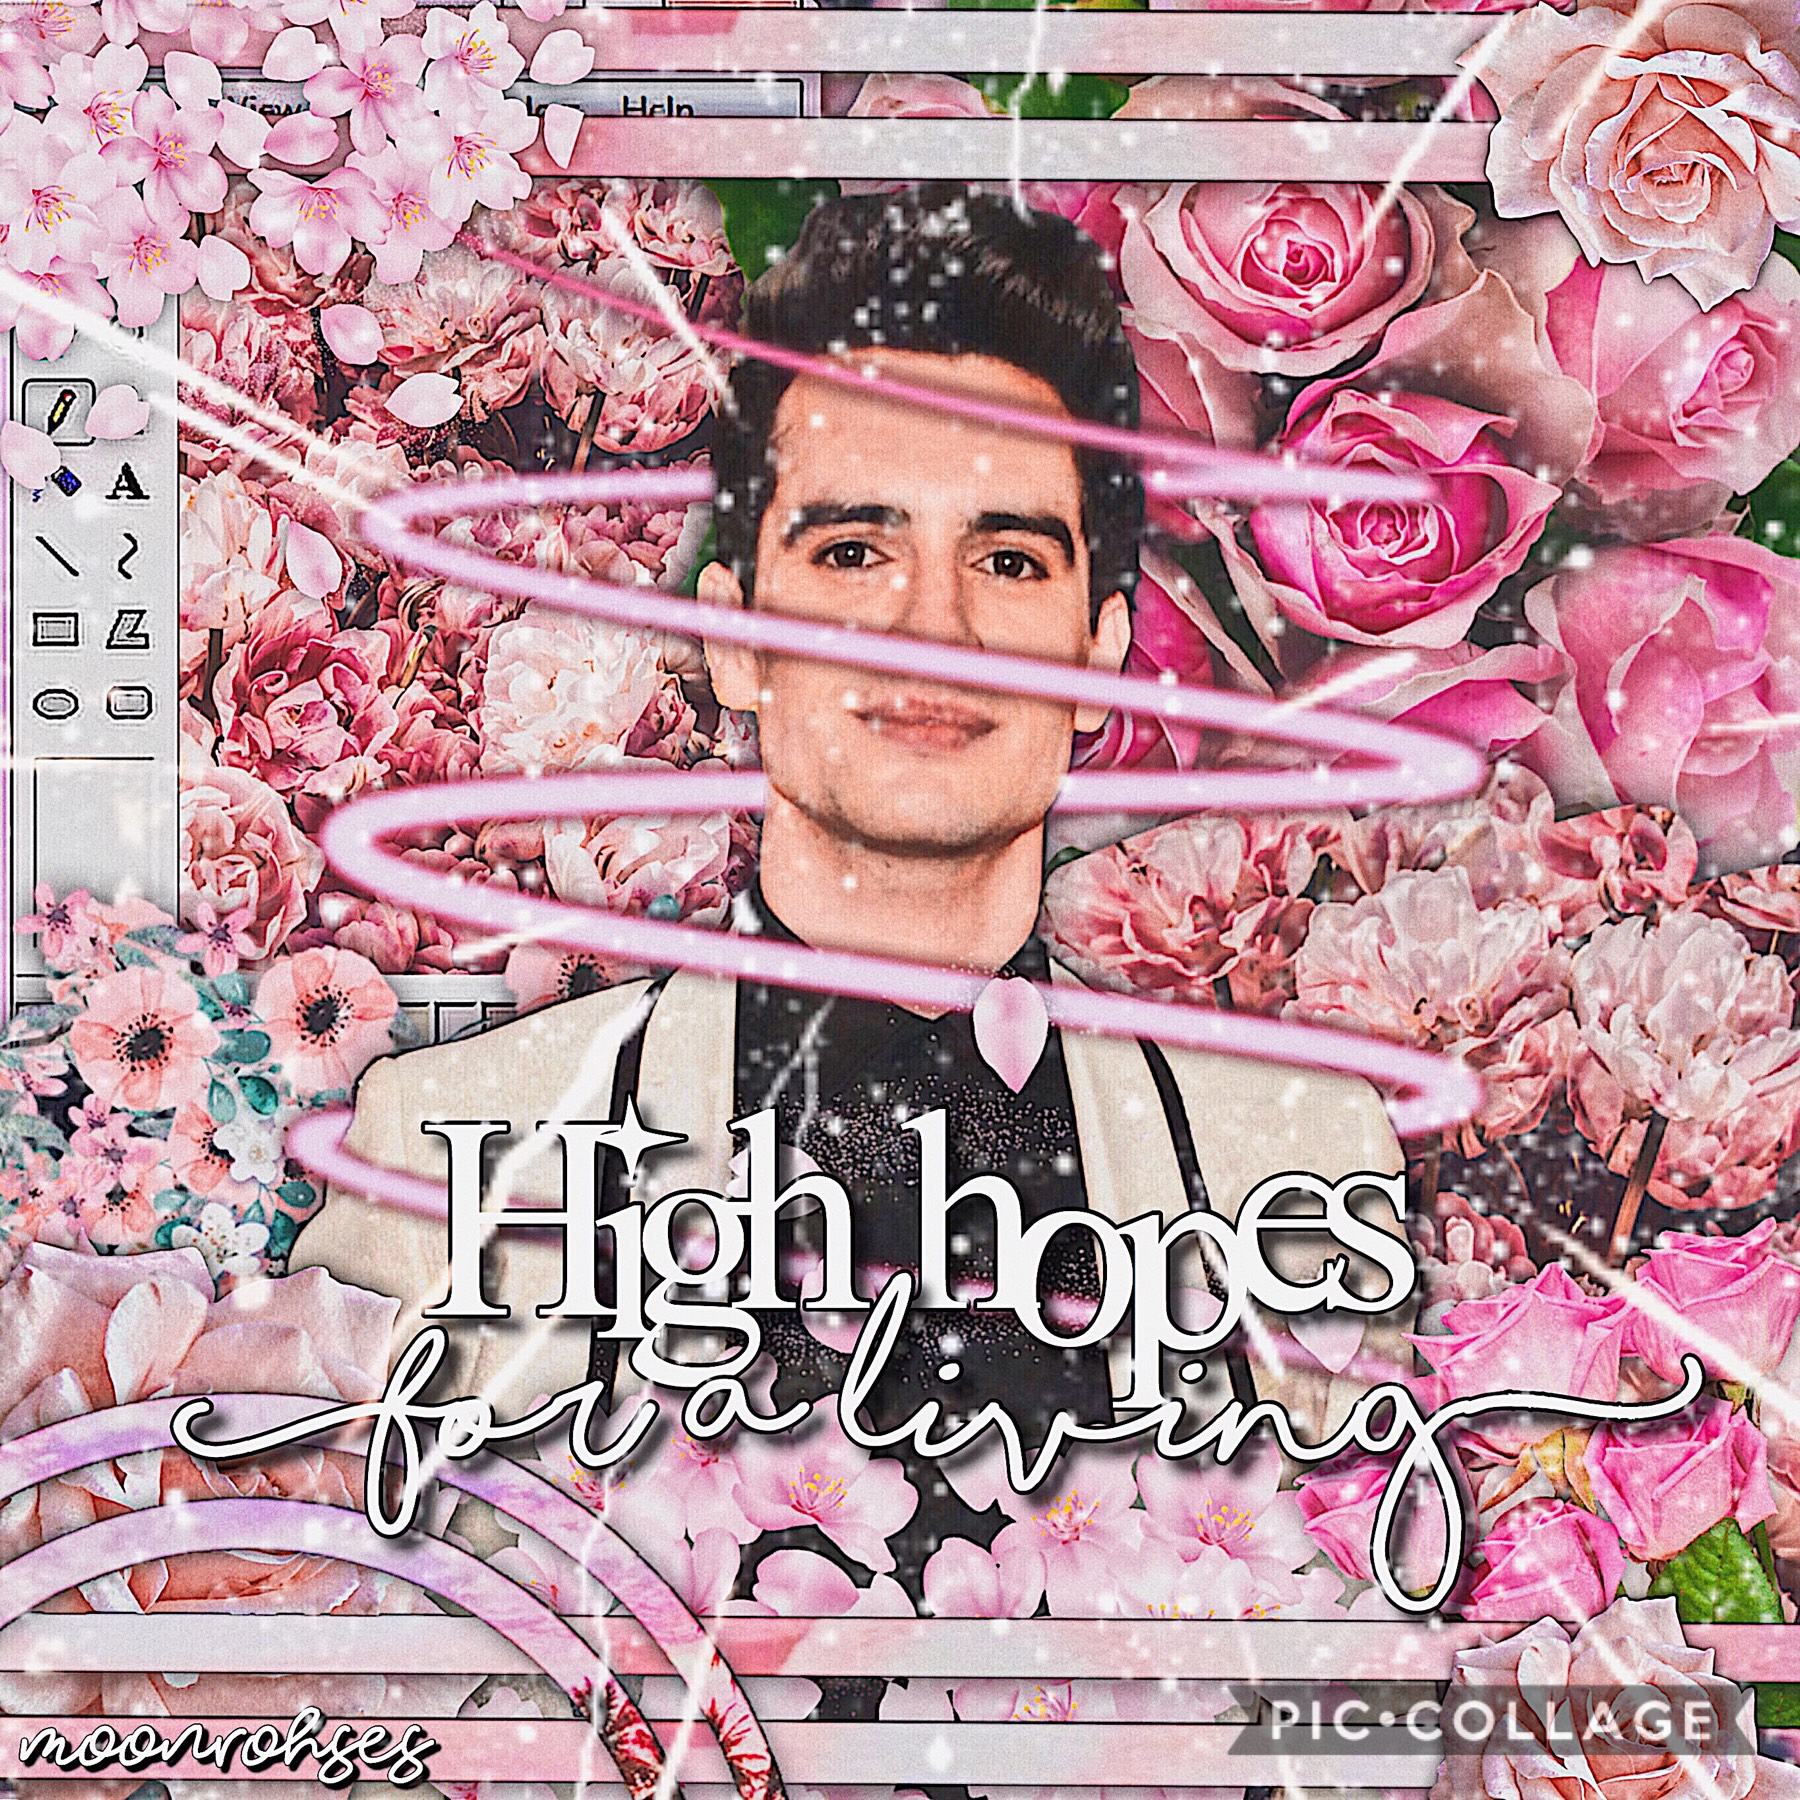 💗 tap for Brendon 💗

Song - high hopes 
